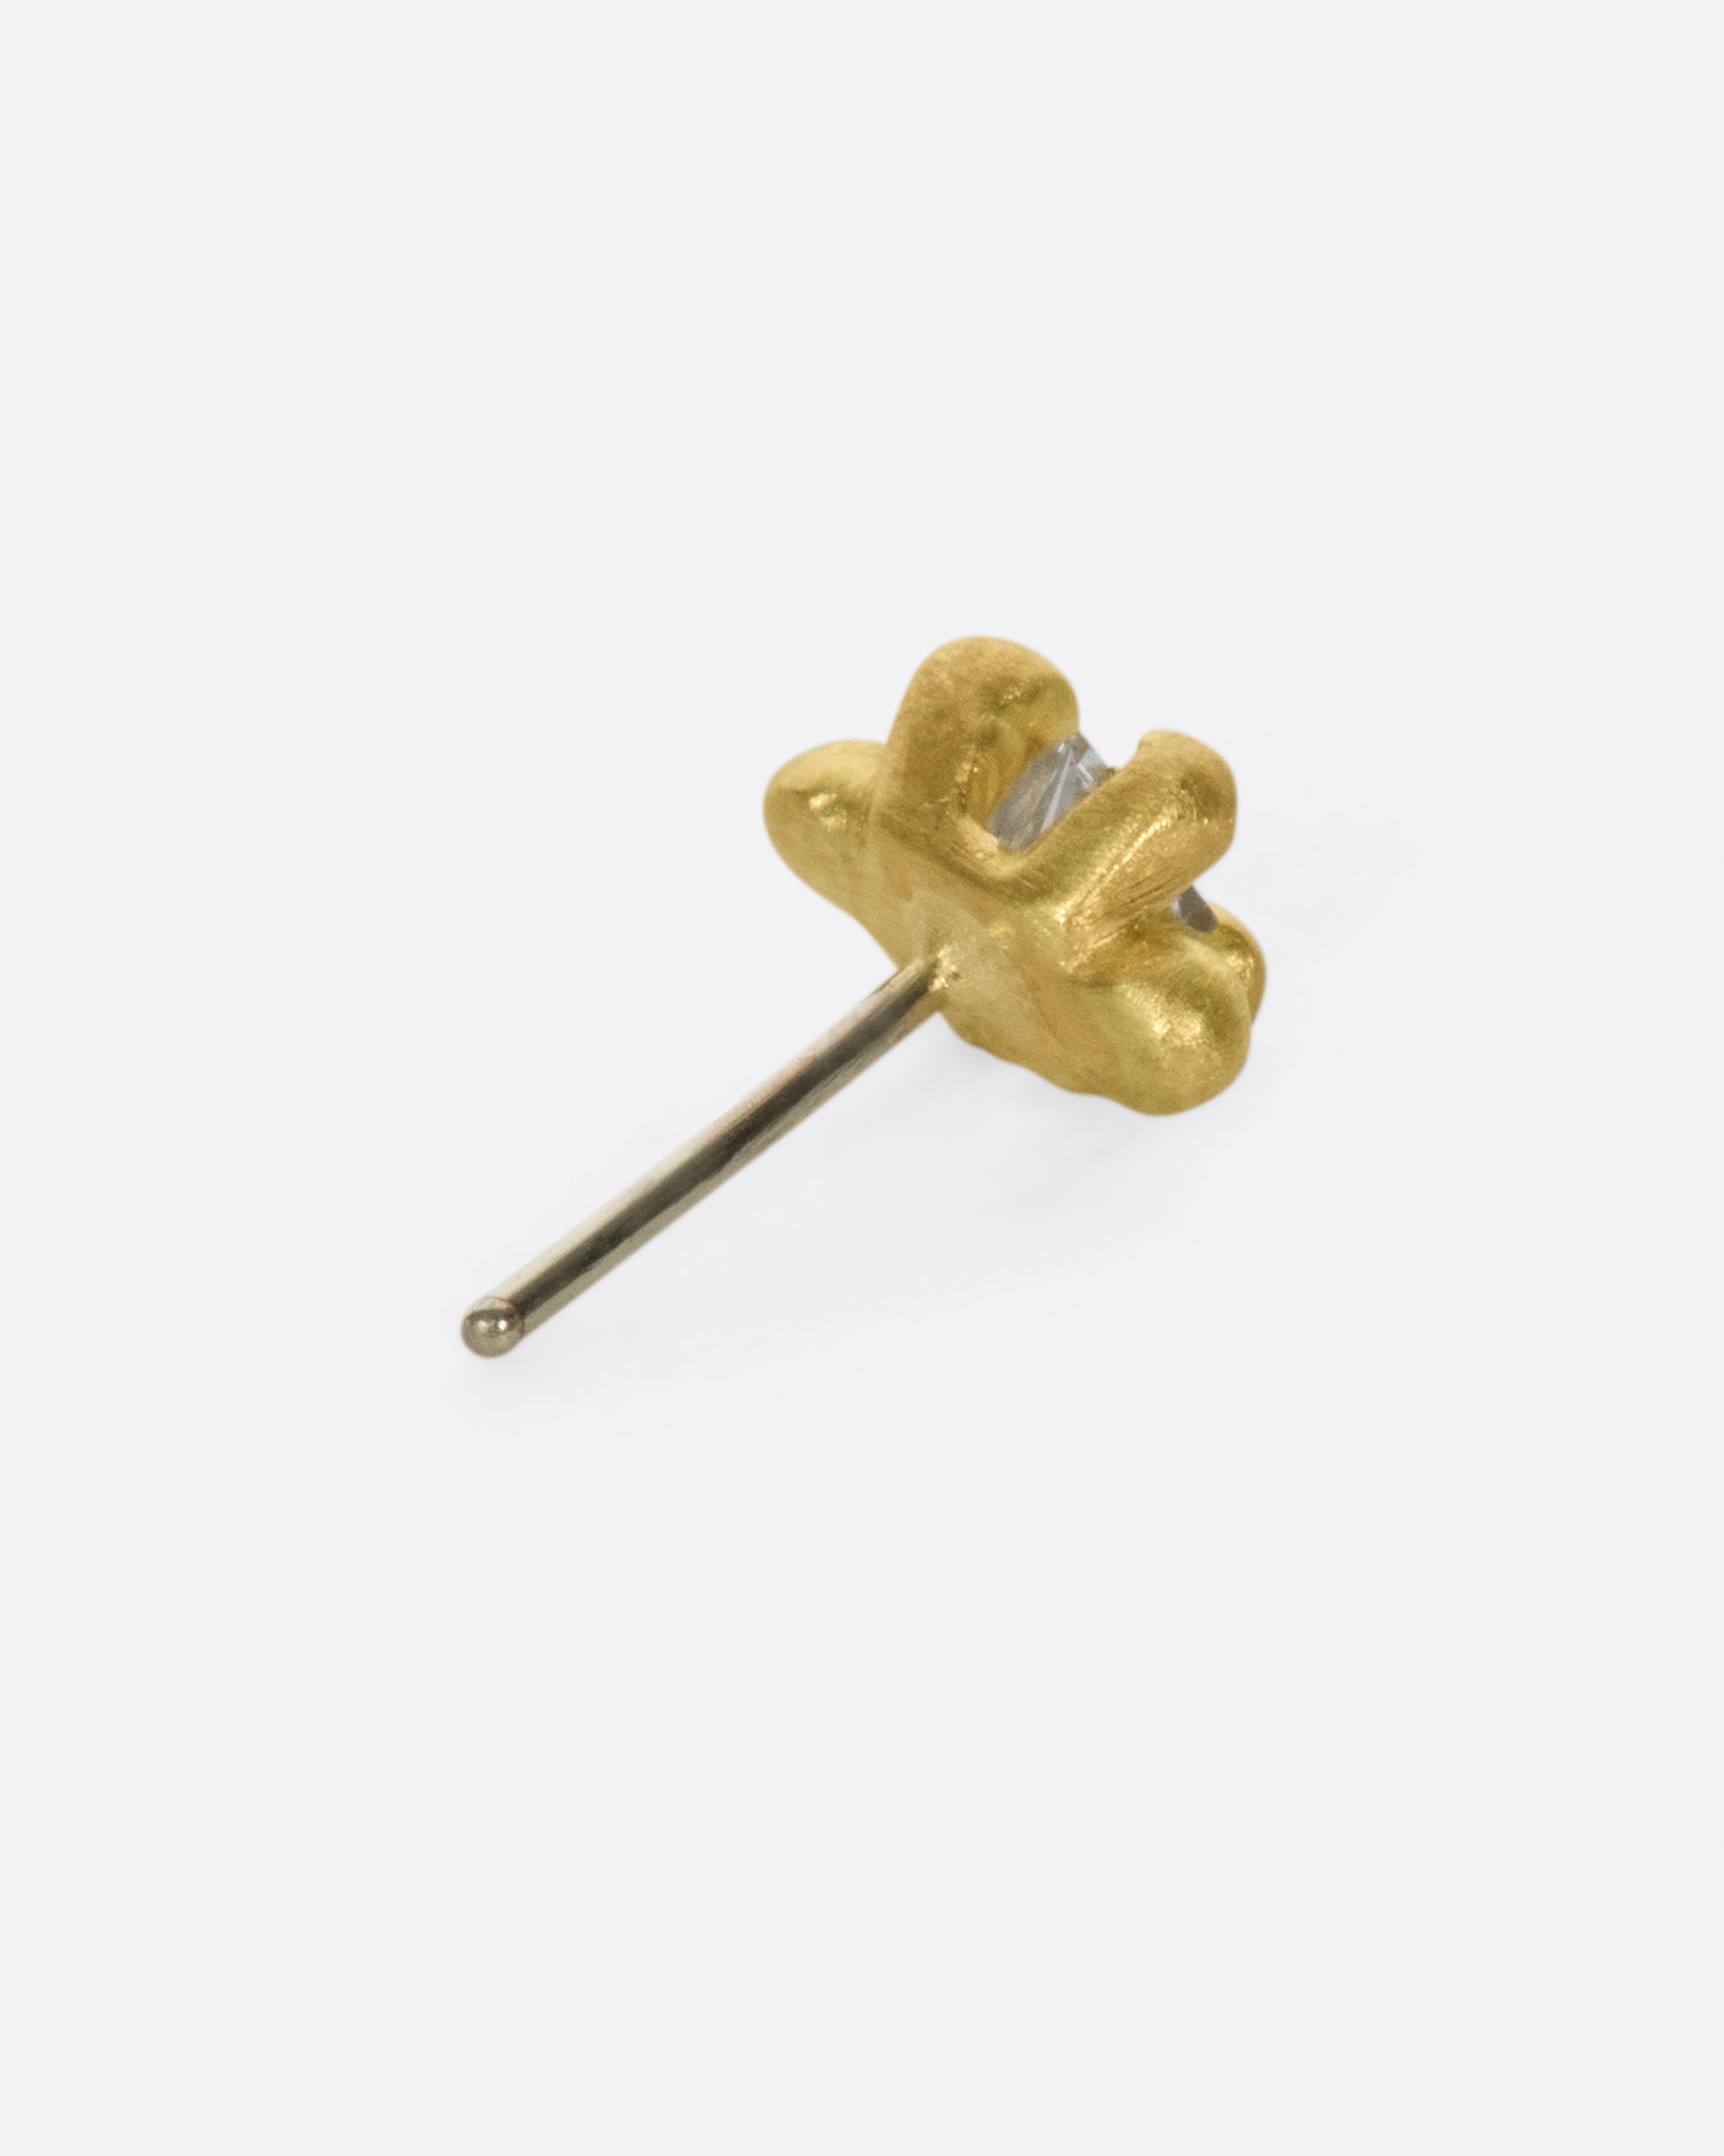 This solitaire stud's matte gold prongs make it more substantial, while remaining soft looking.